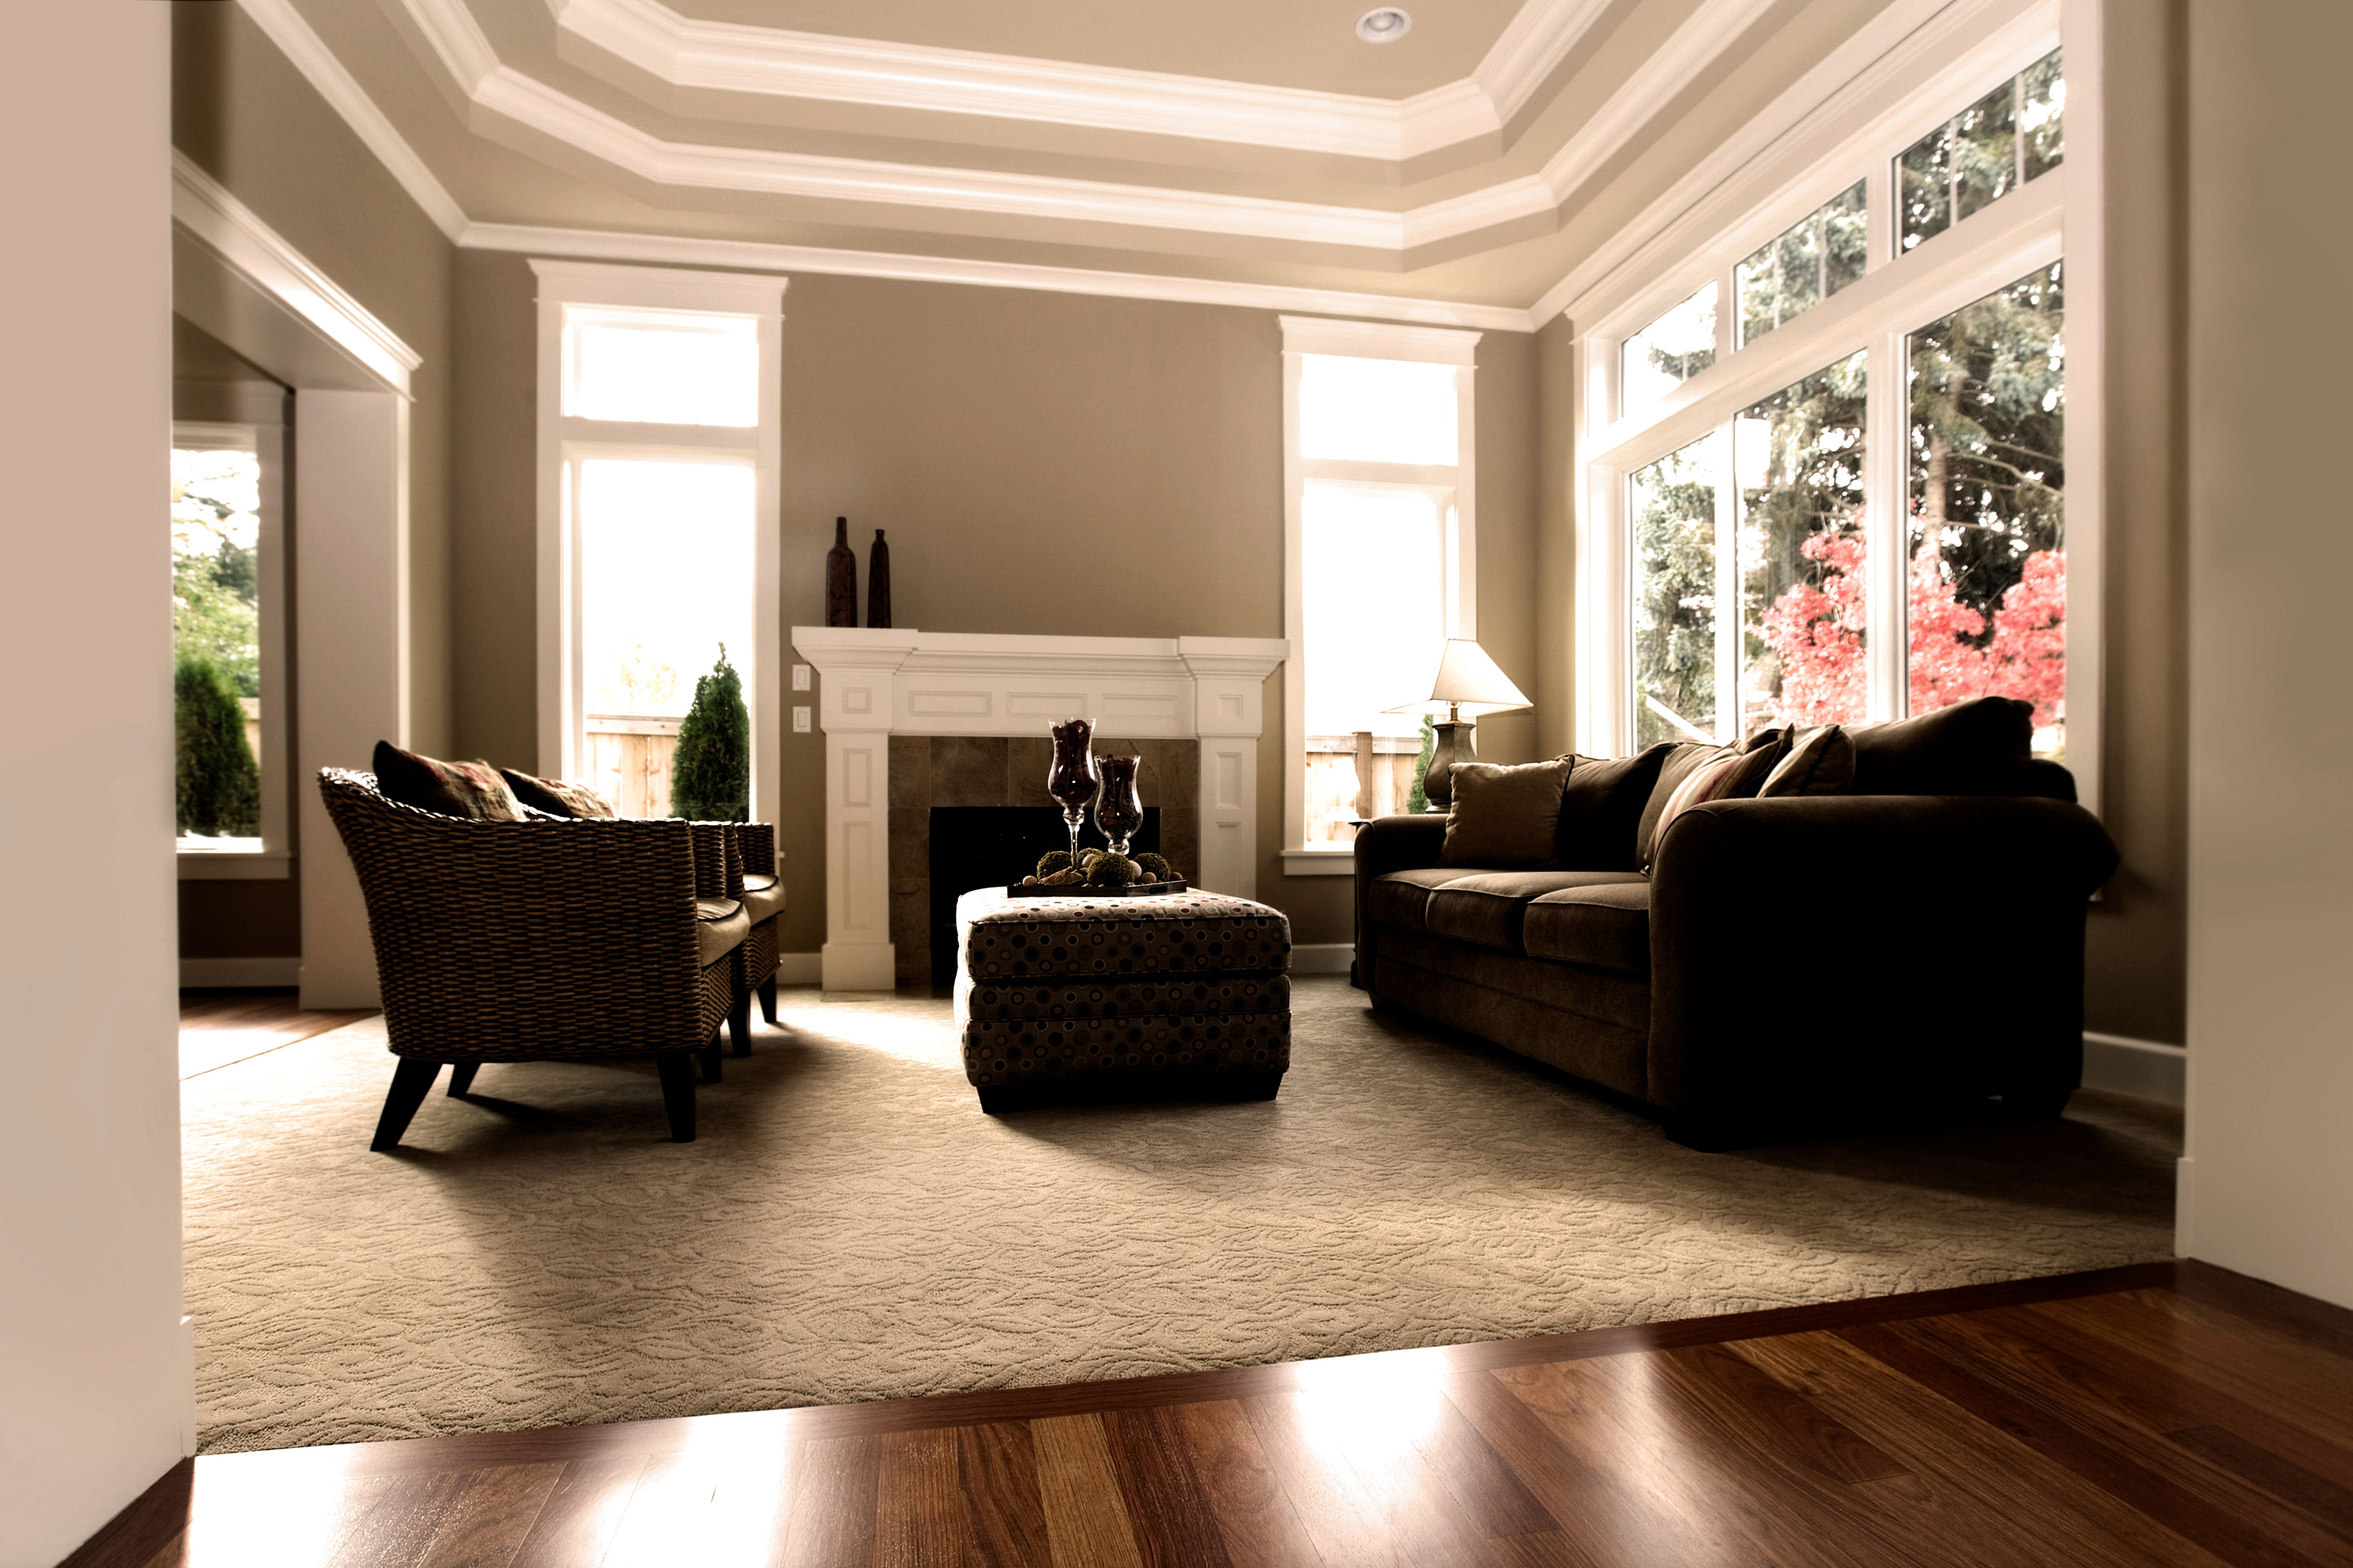 A cream and brown living room.